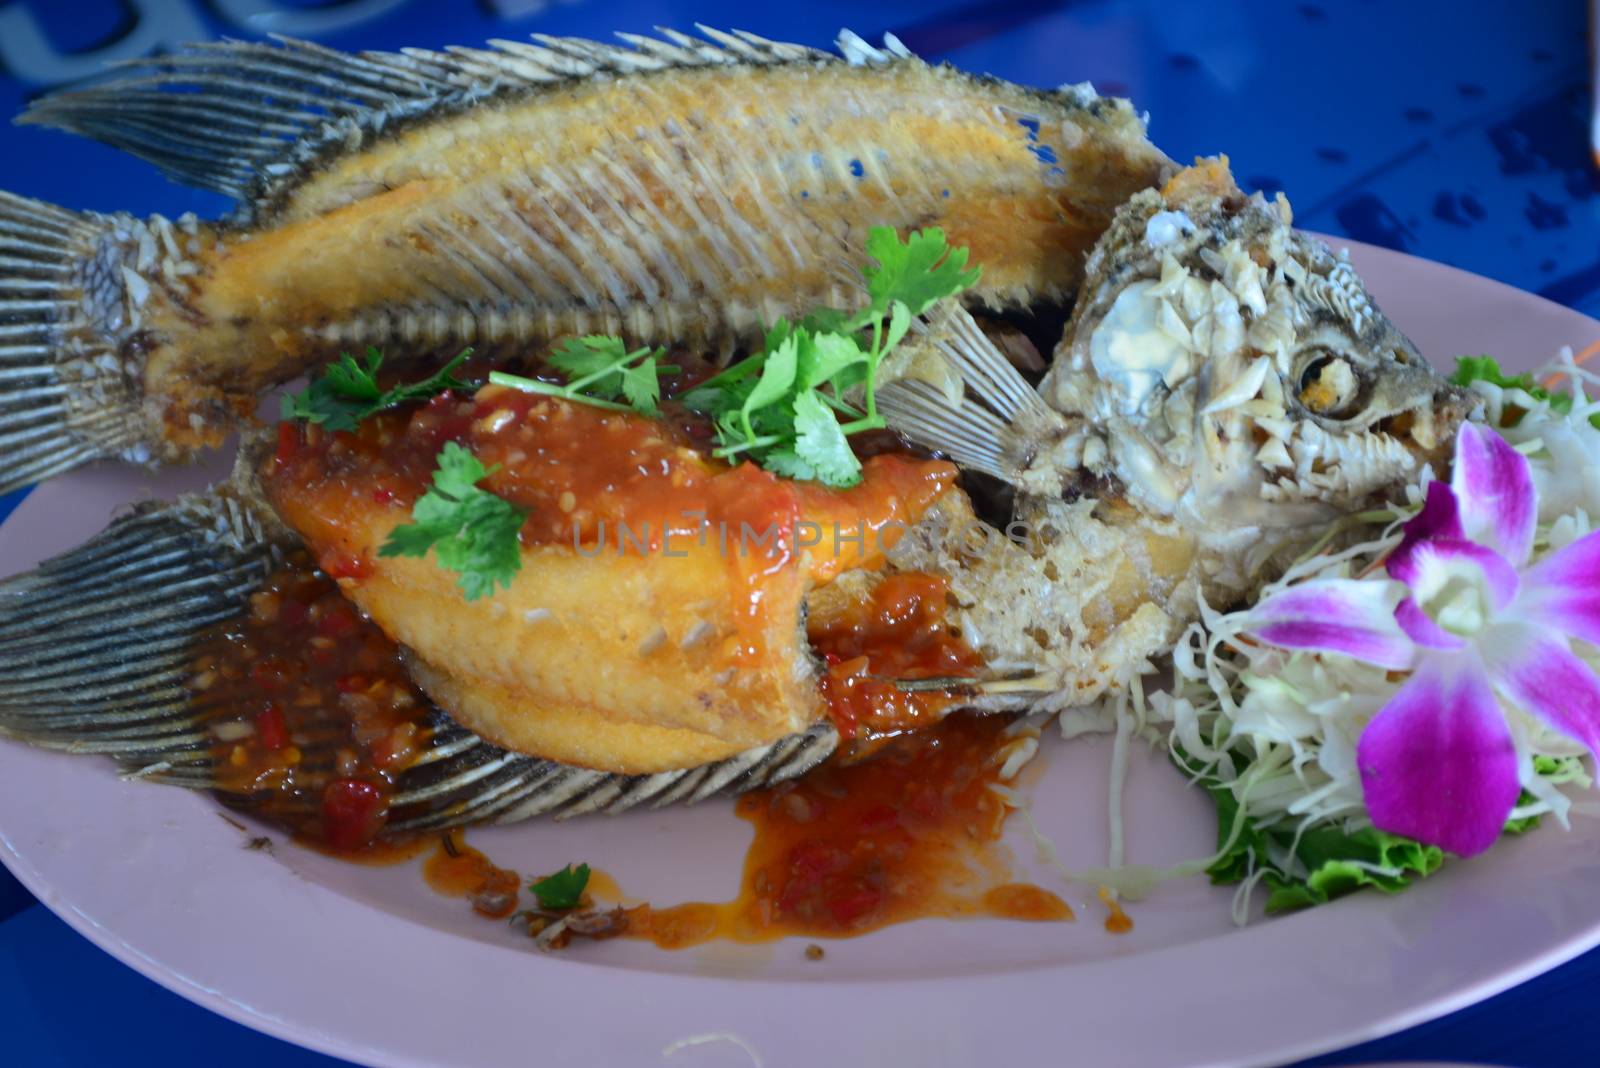 Fried fish with sweet chili sauce recipe, Thaifood, note  select focus with shallow depth of field	